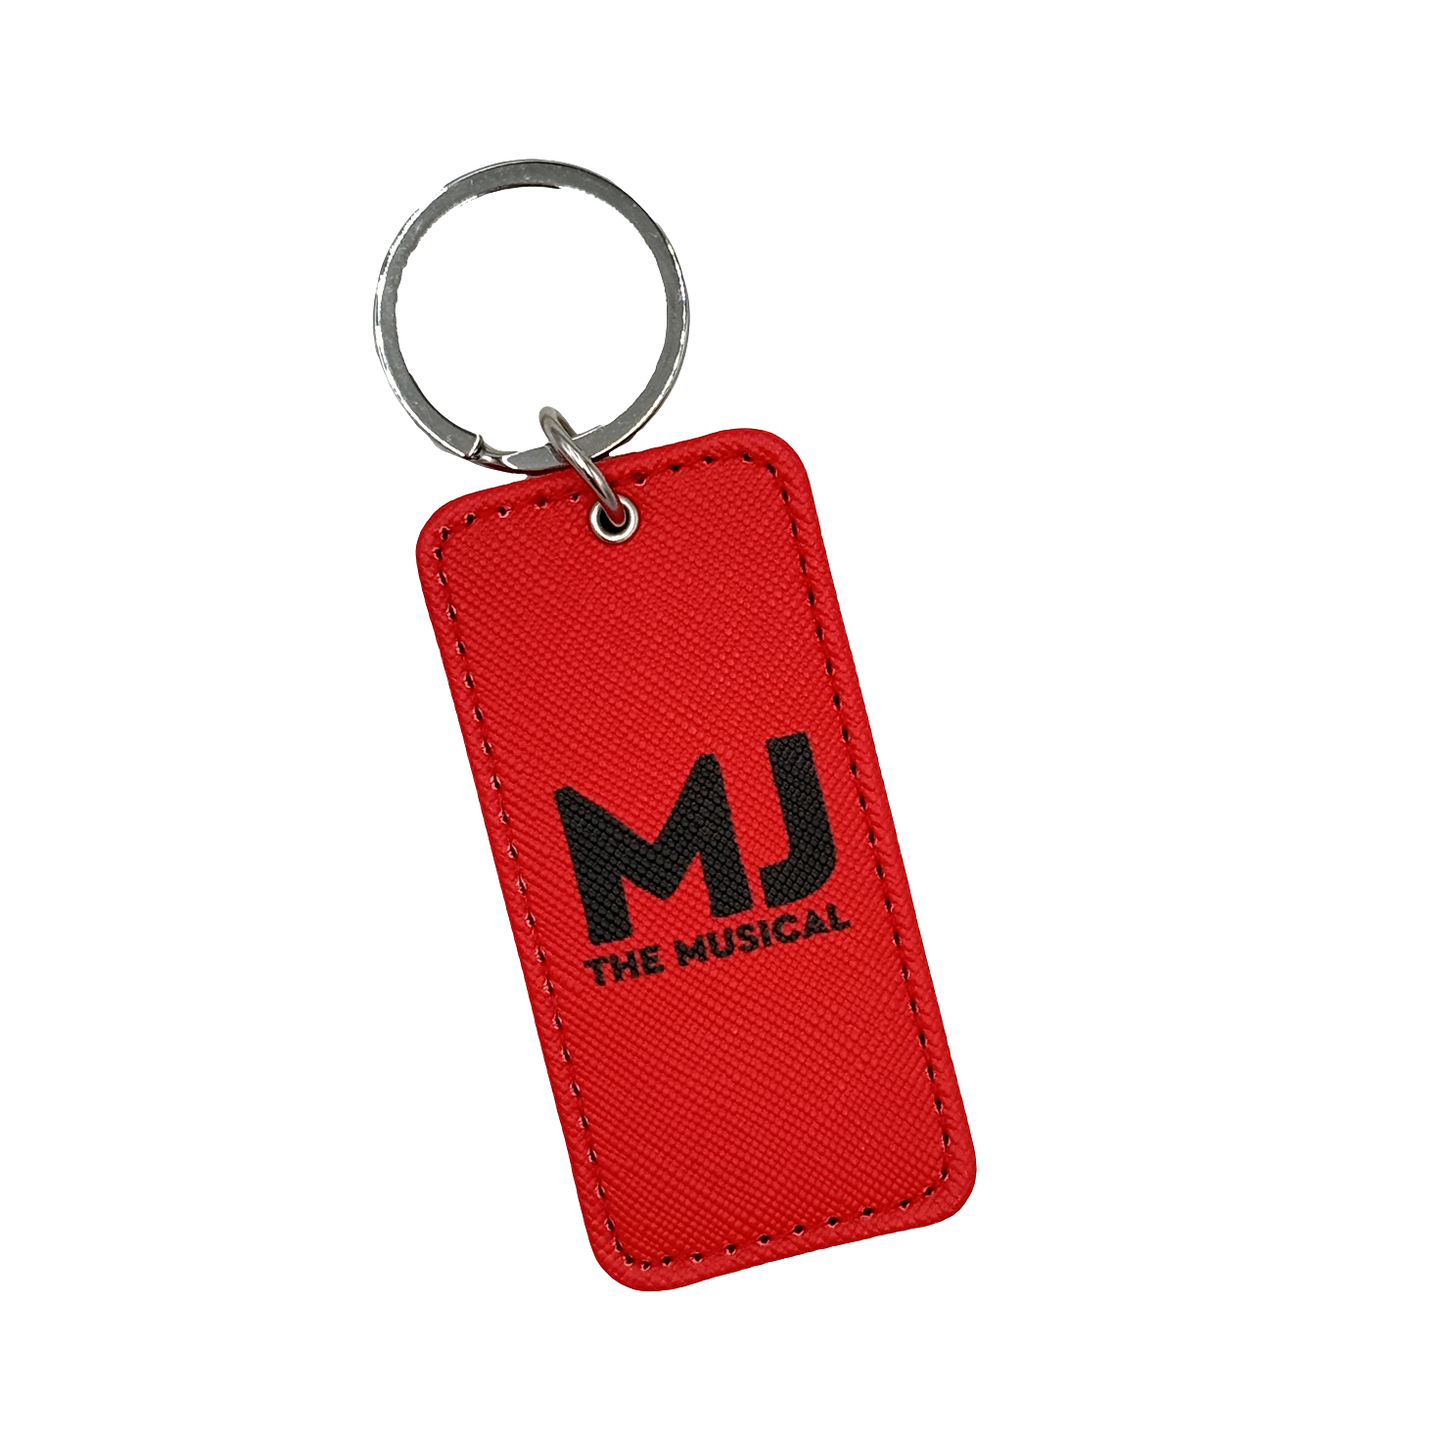 MJ THE MUSICAL Leather Keychain